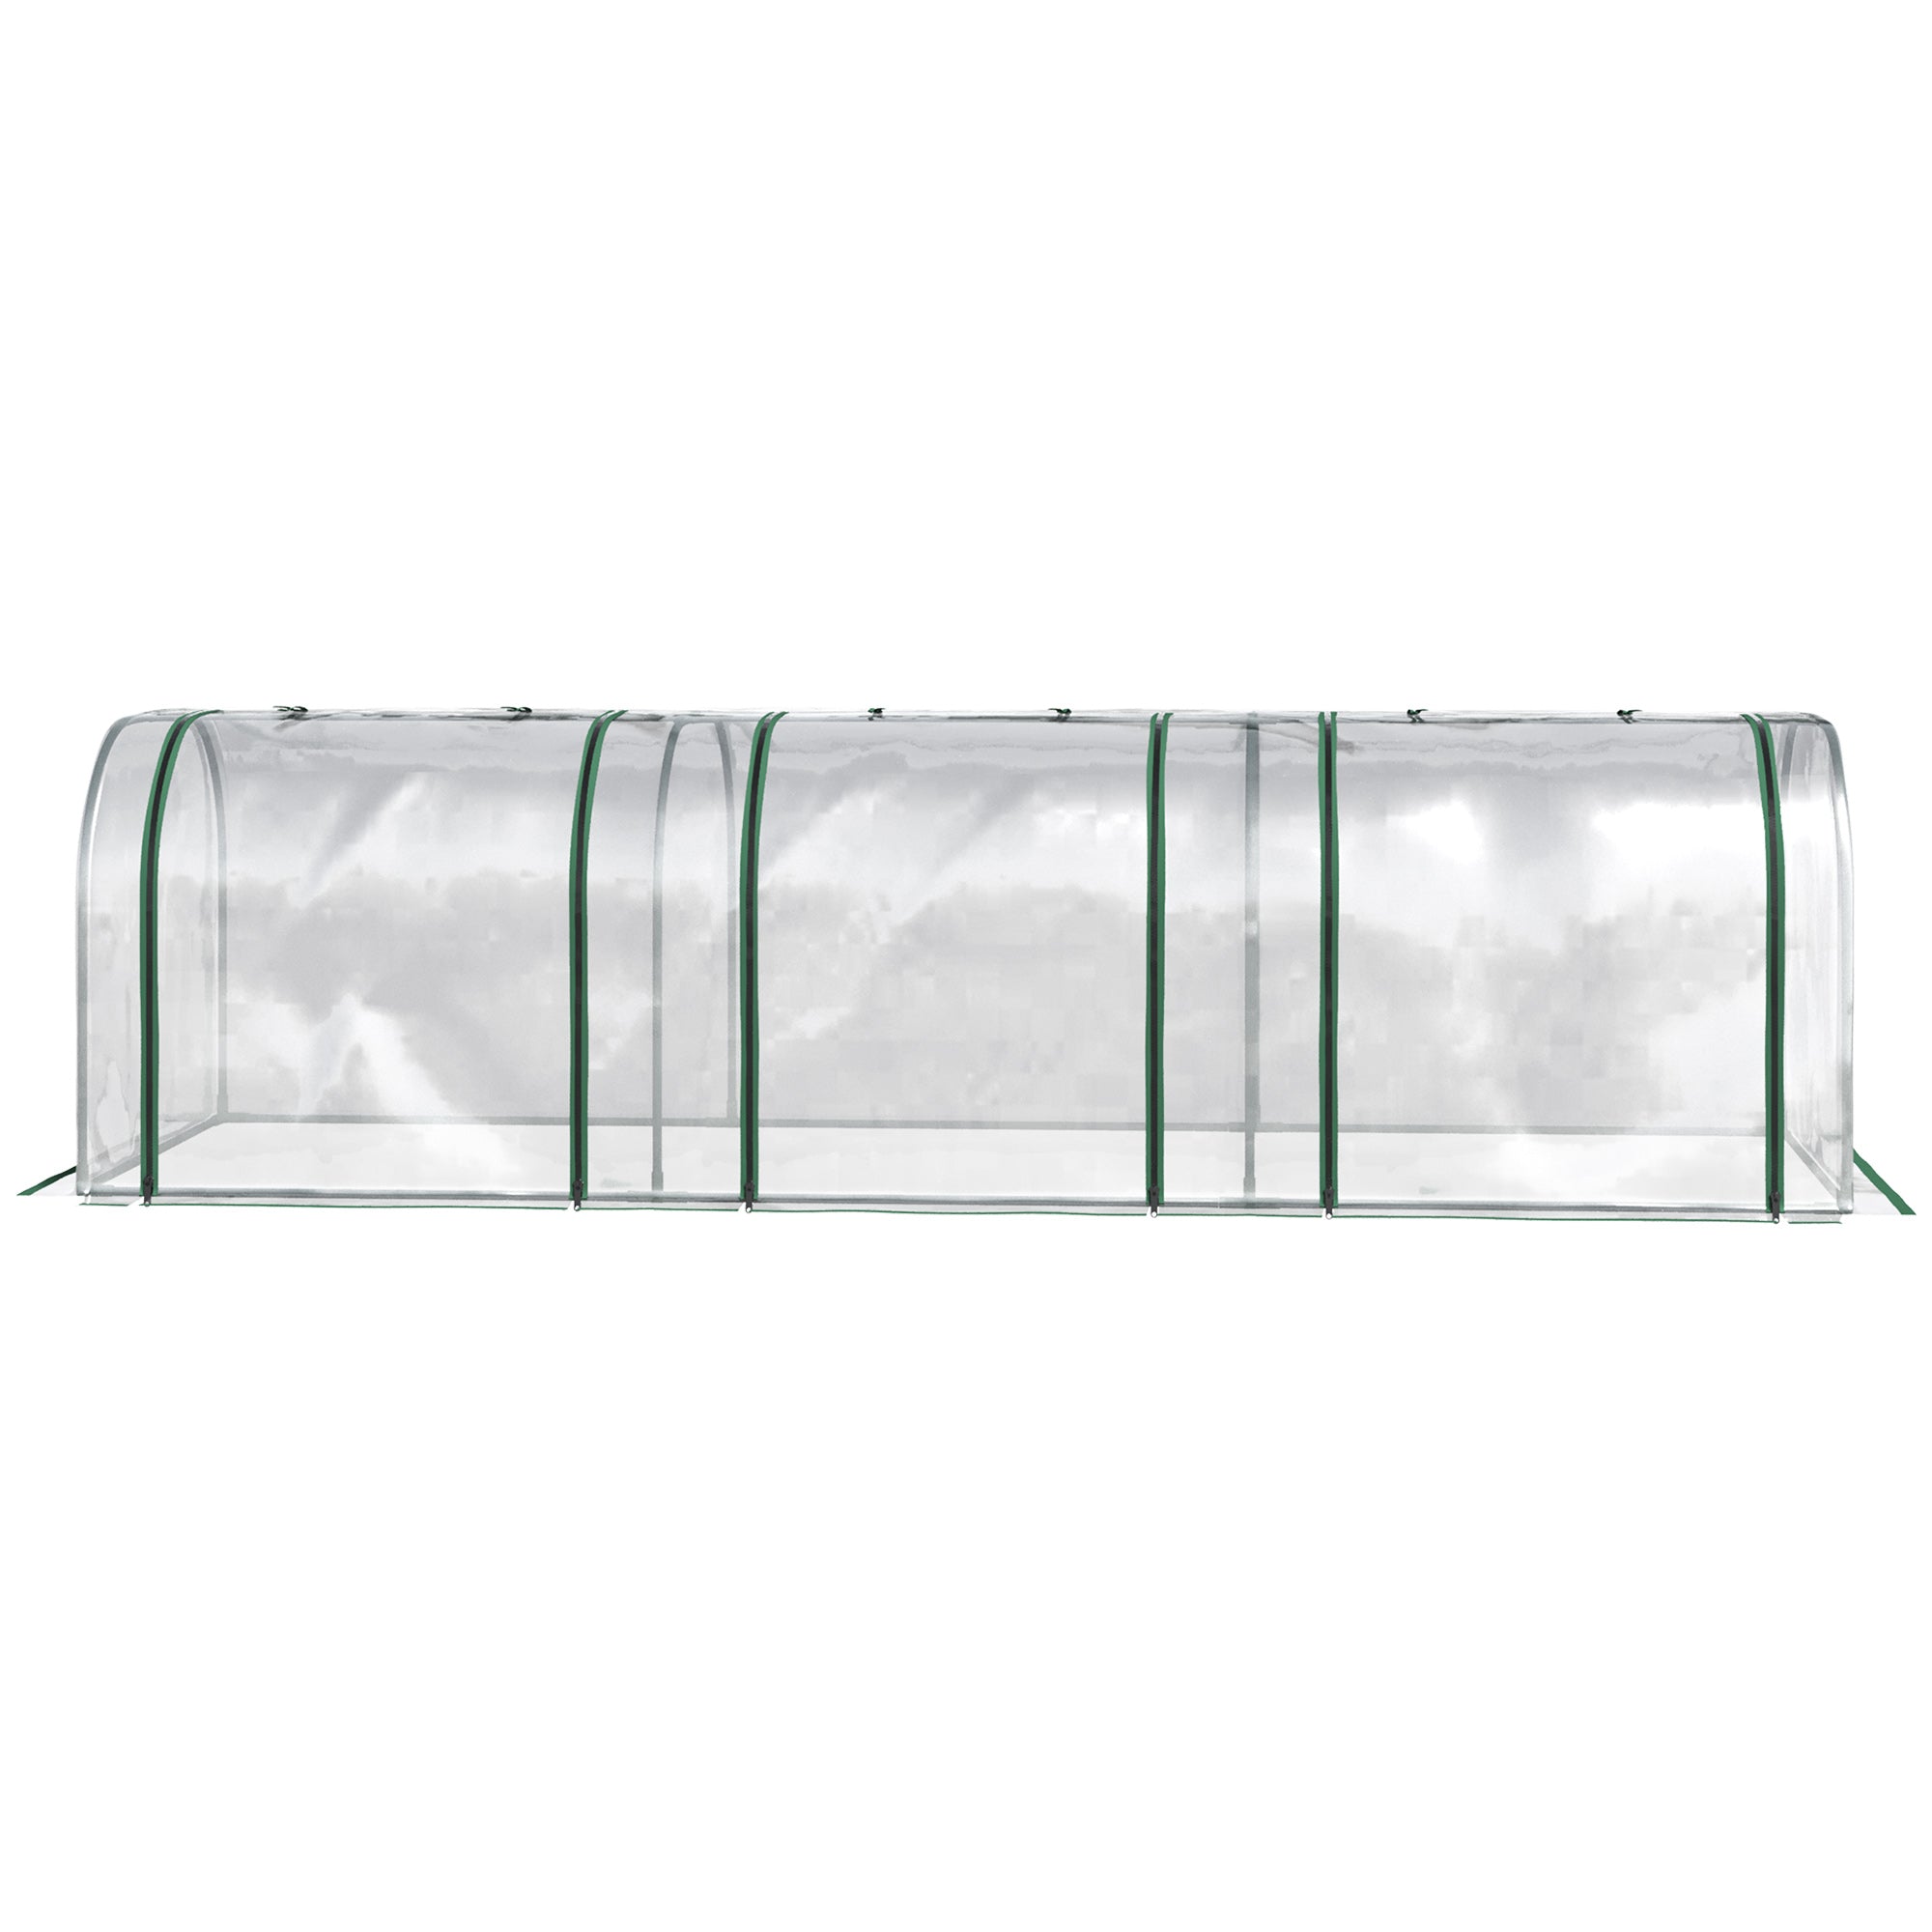 Outsunny PVC Tunnel Greenhouse Green Grow House Steel Frame for Garden Backyard with Zipper Doors 295x100x80 cm, Clear